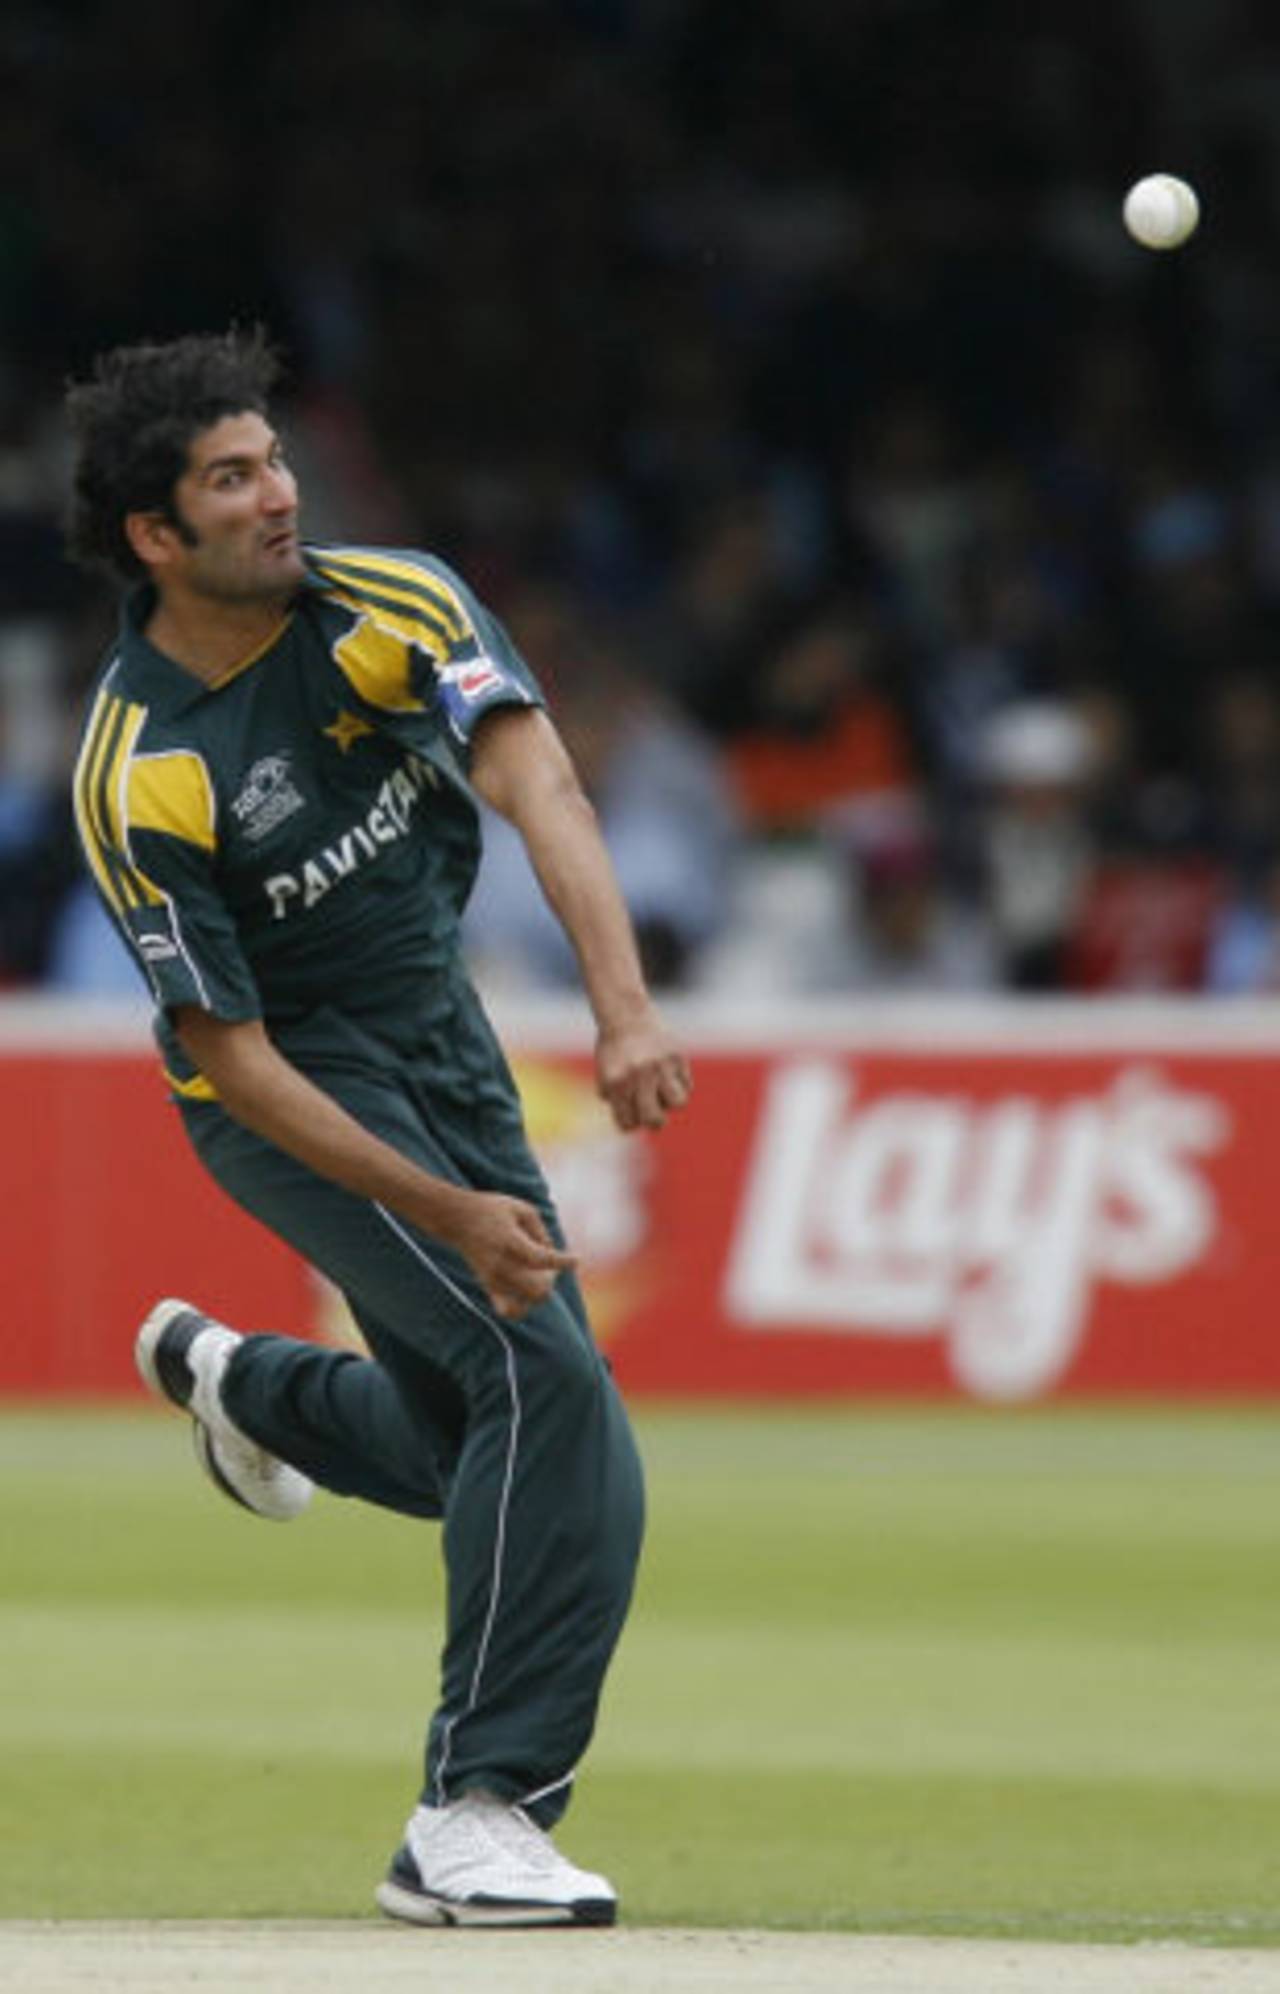 Sohail Tanvir was turned away by immigration officers at London's Heathrow airport for having the wrong visa papers&nbsp;&nbsp;&bull;&nbsp;&nbsp;AFP